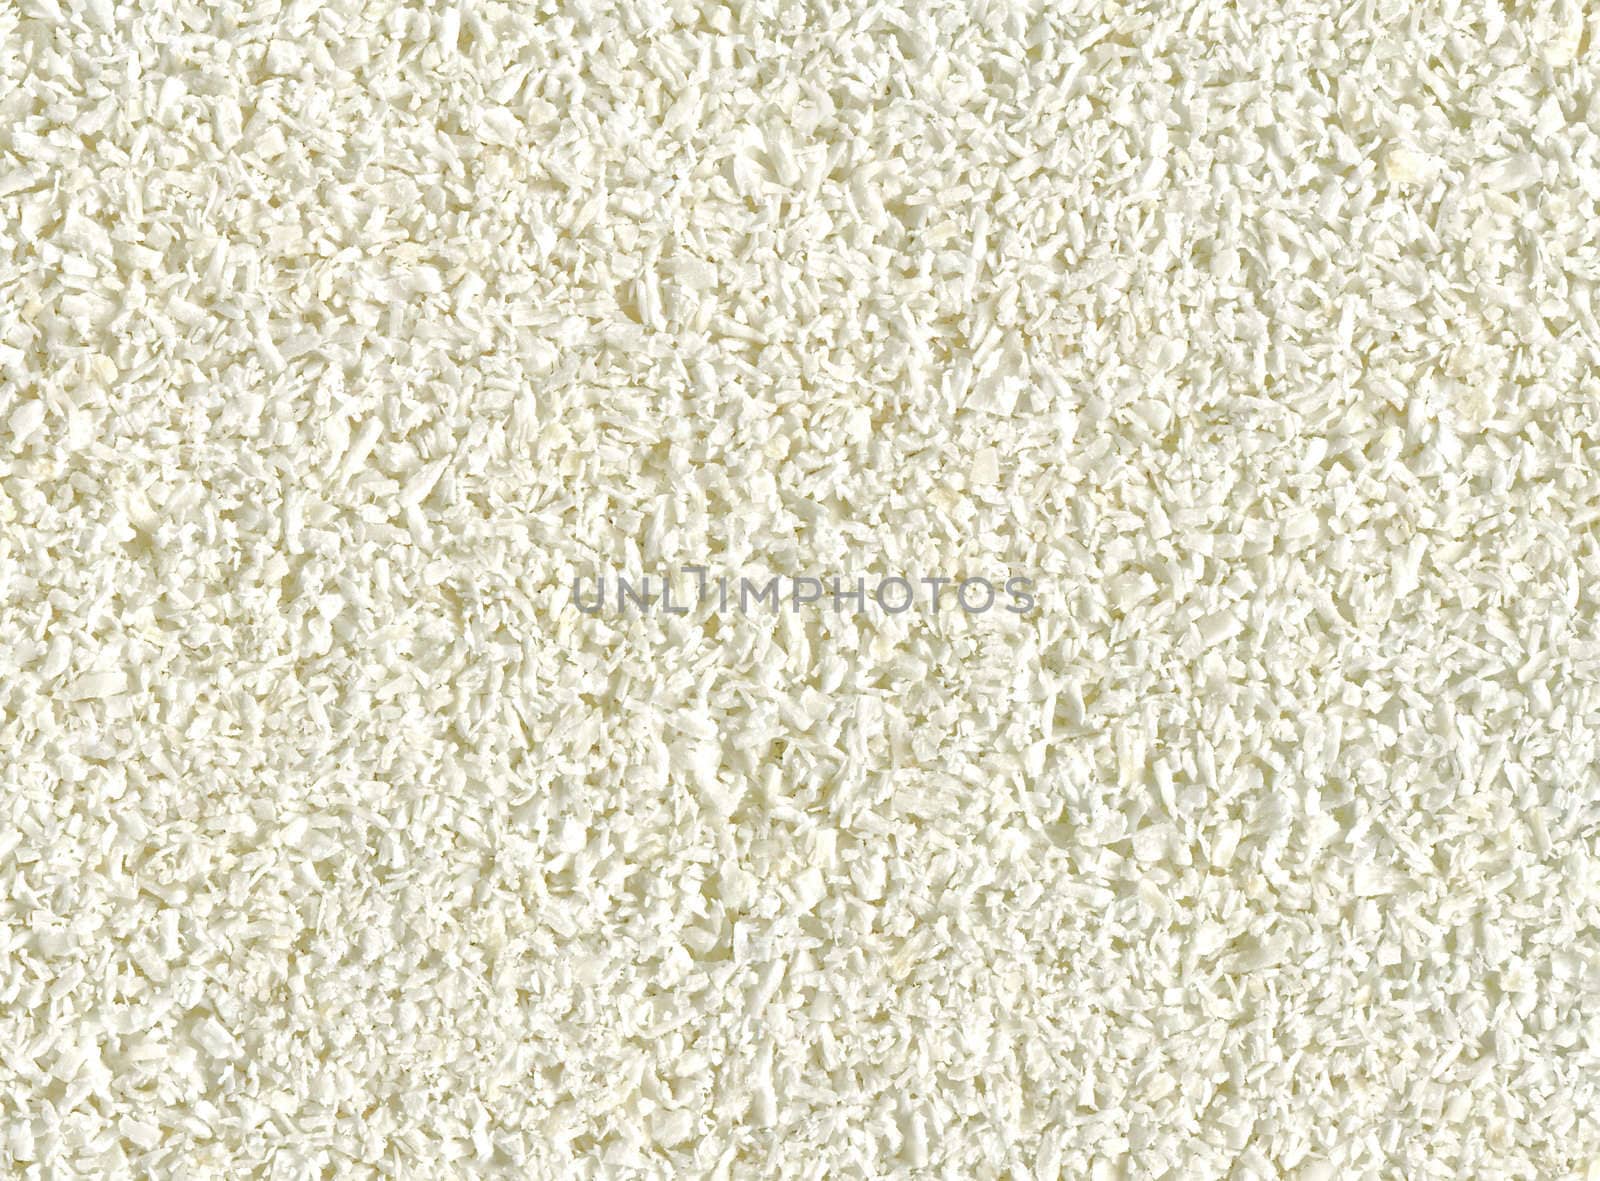 Grated coconut background.